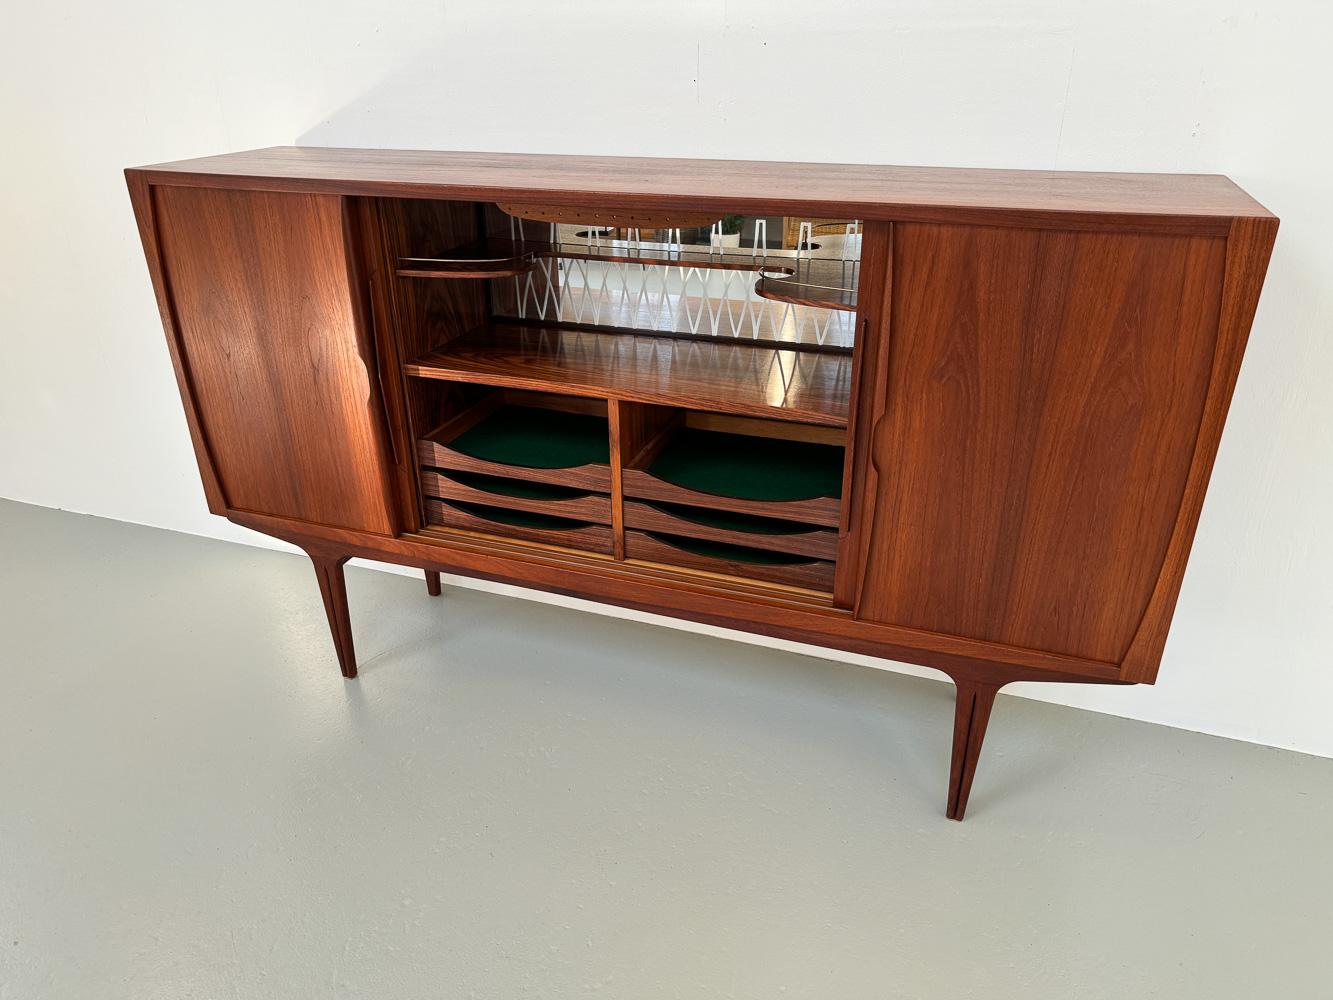 Mid-20th Century Danish Mid-Century Teak Credenza with Bar by Vantinge, 1960s. For Sale